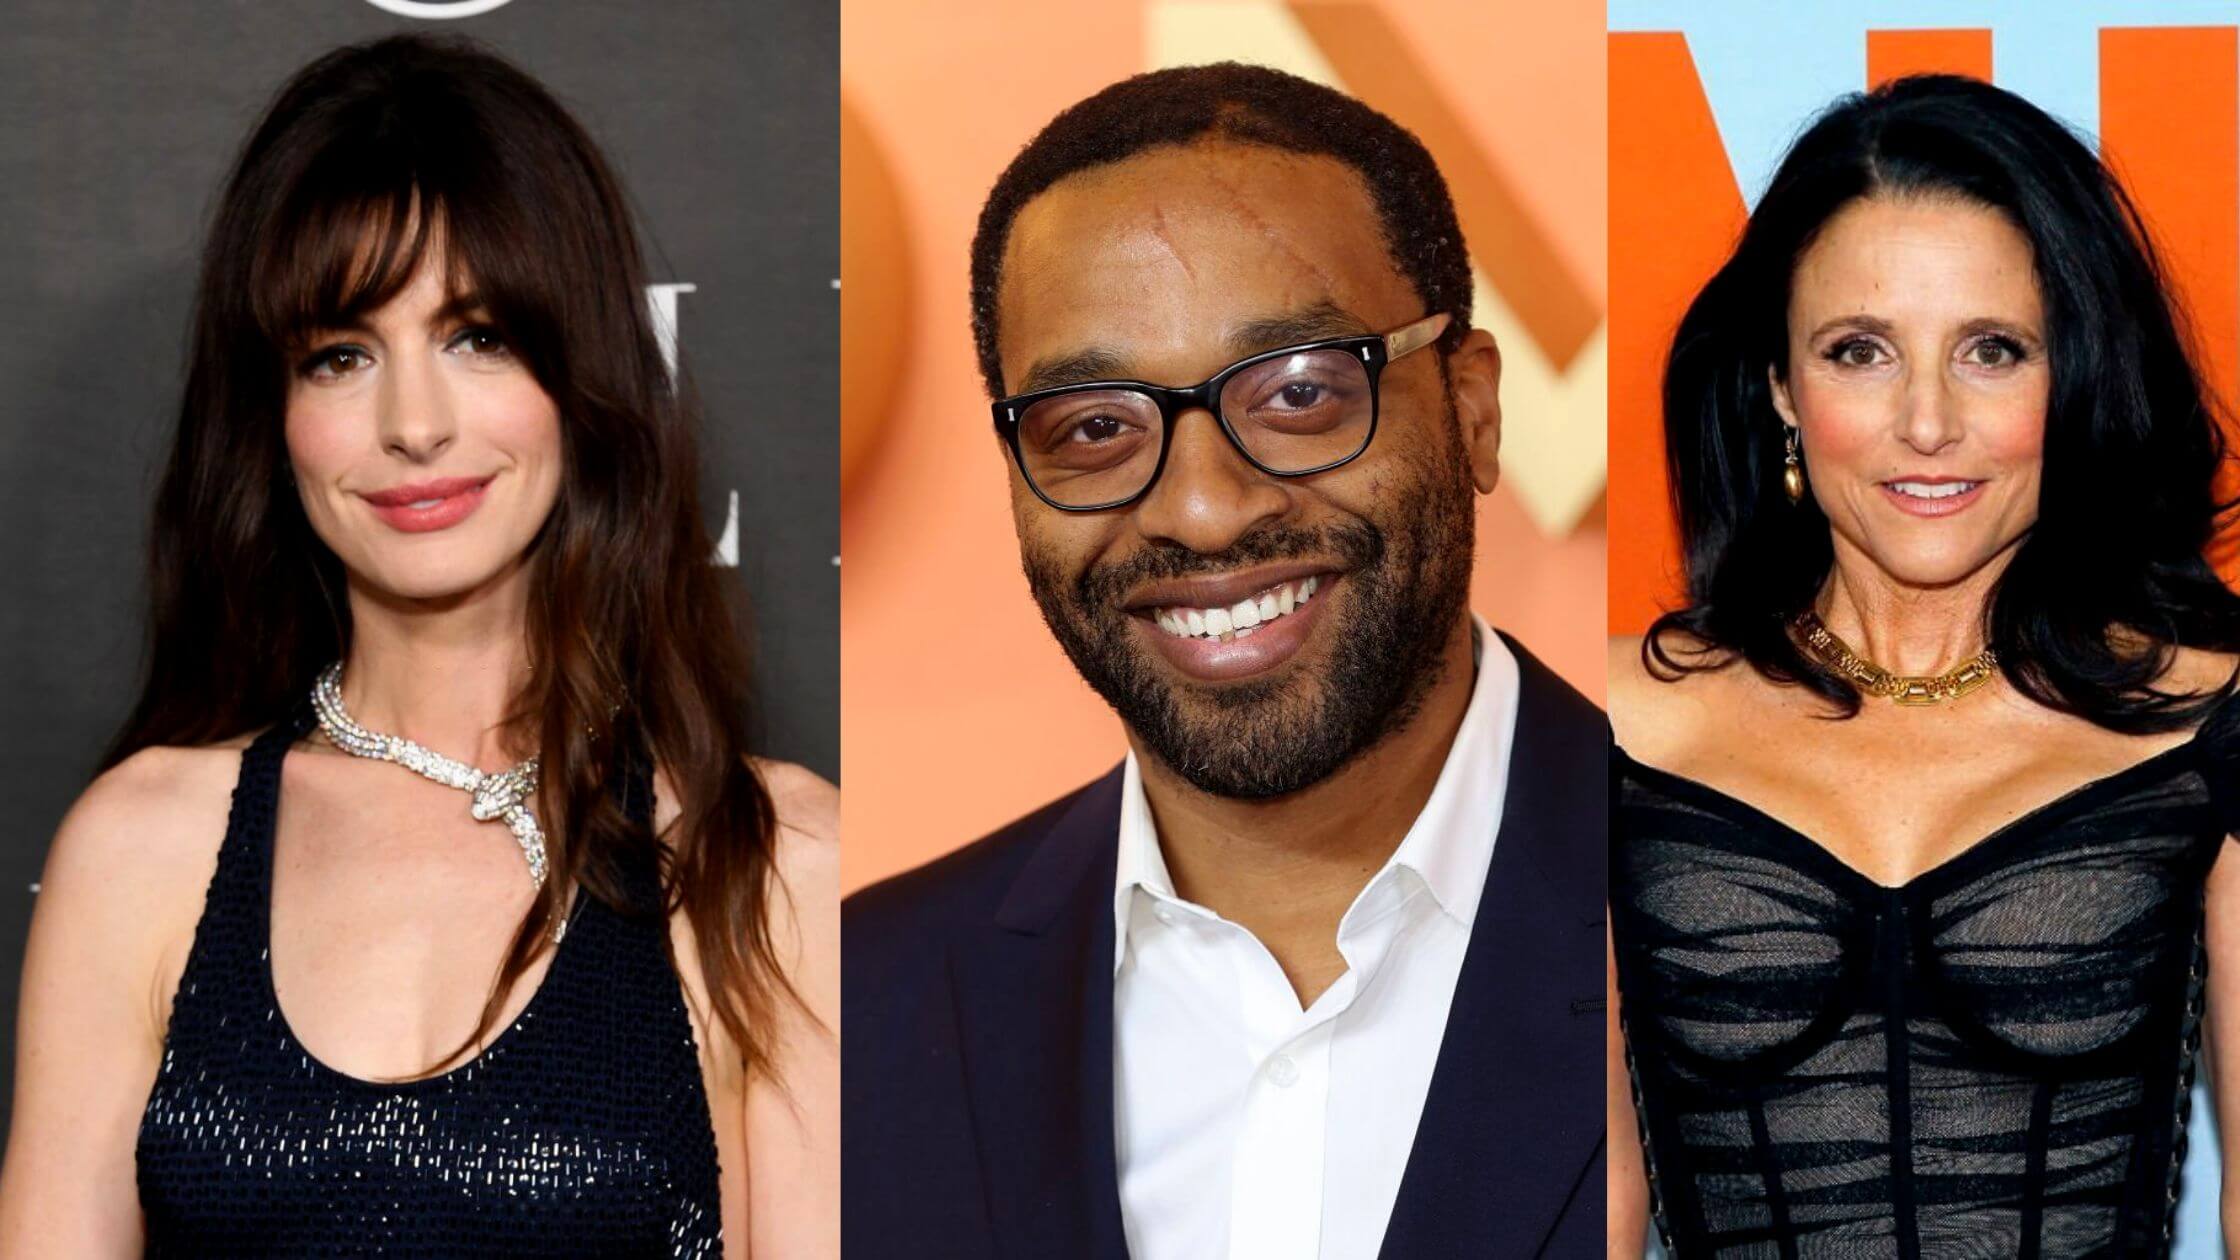 Sundance 2023's Lineup Headed By Anne Hathaway, Chiwetel Ejiofor, And Julia Louis-Dreyfus